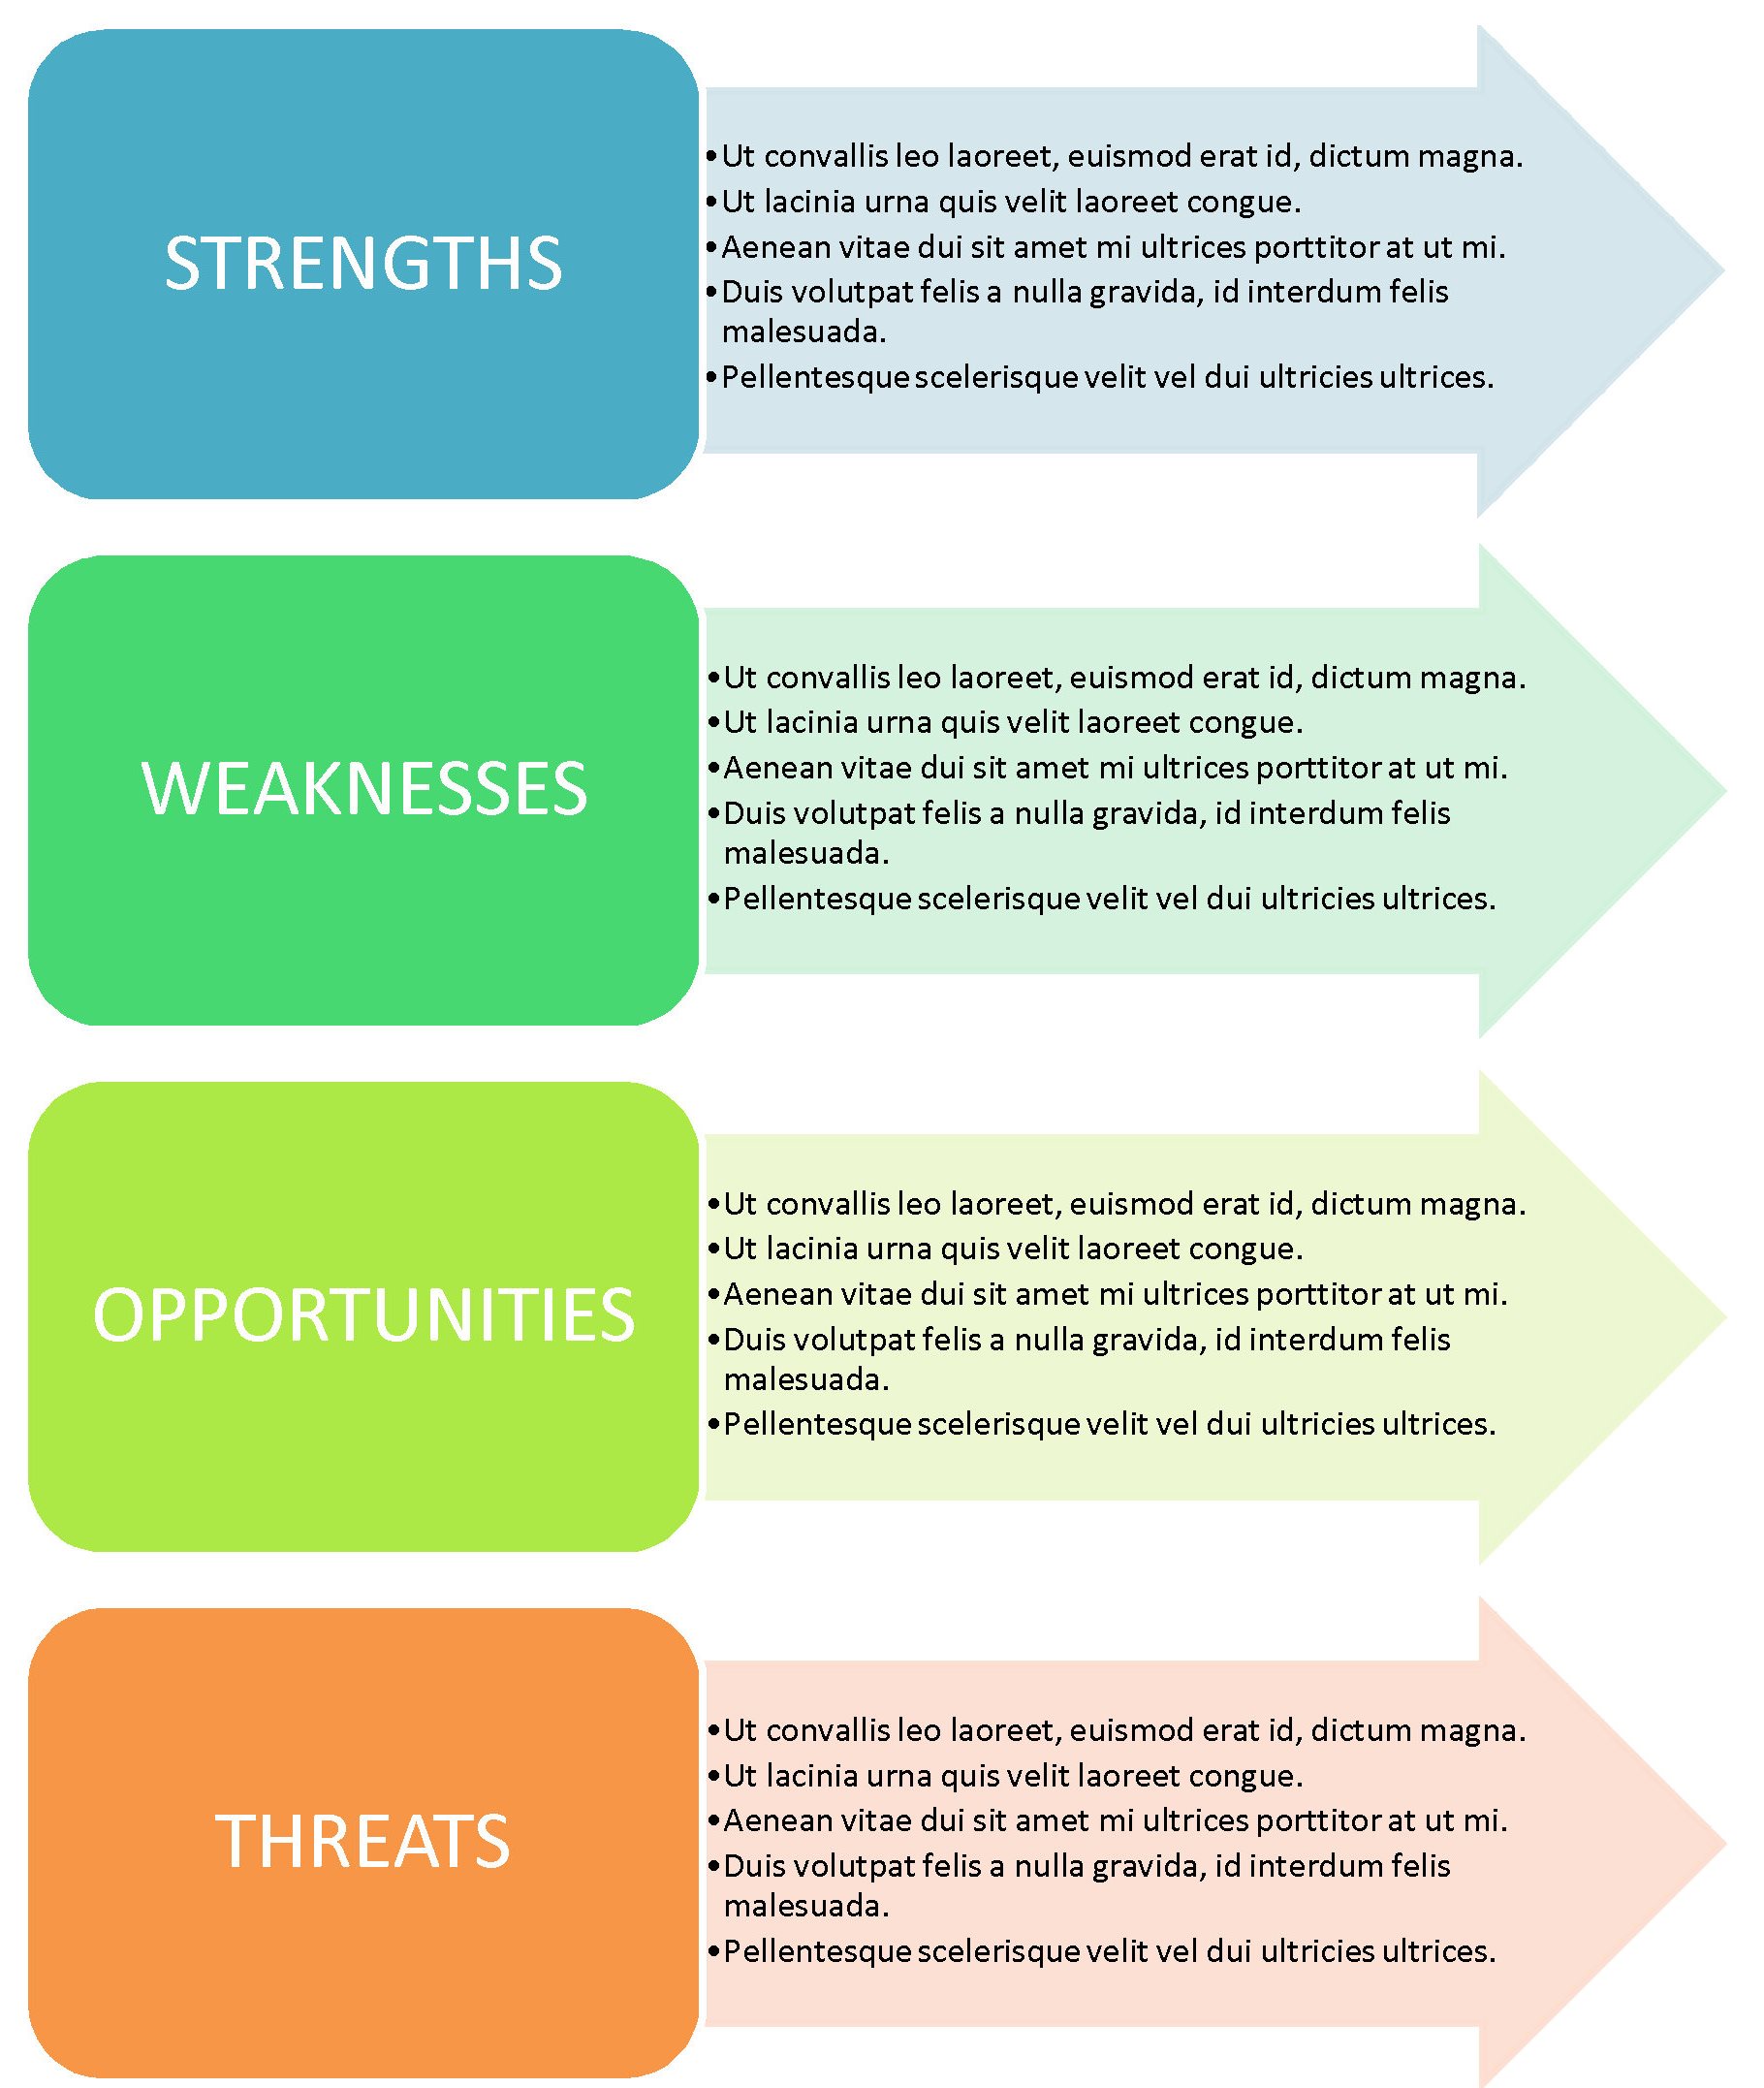 40 Free Swot Analysis Templates In Word Demplates